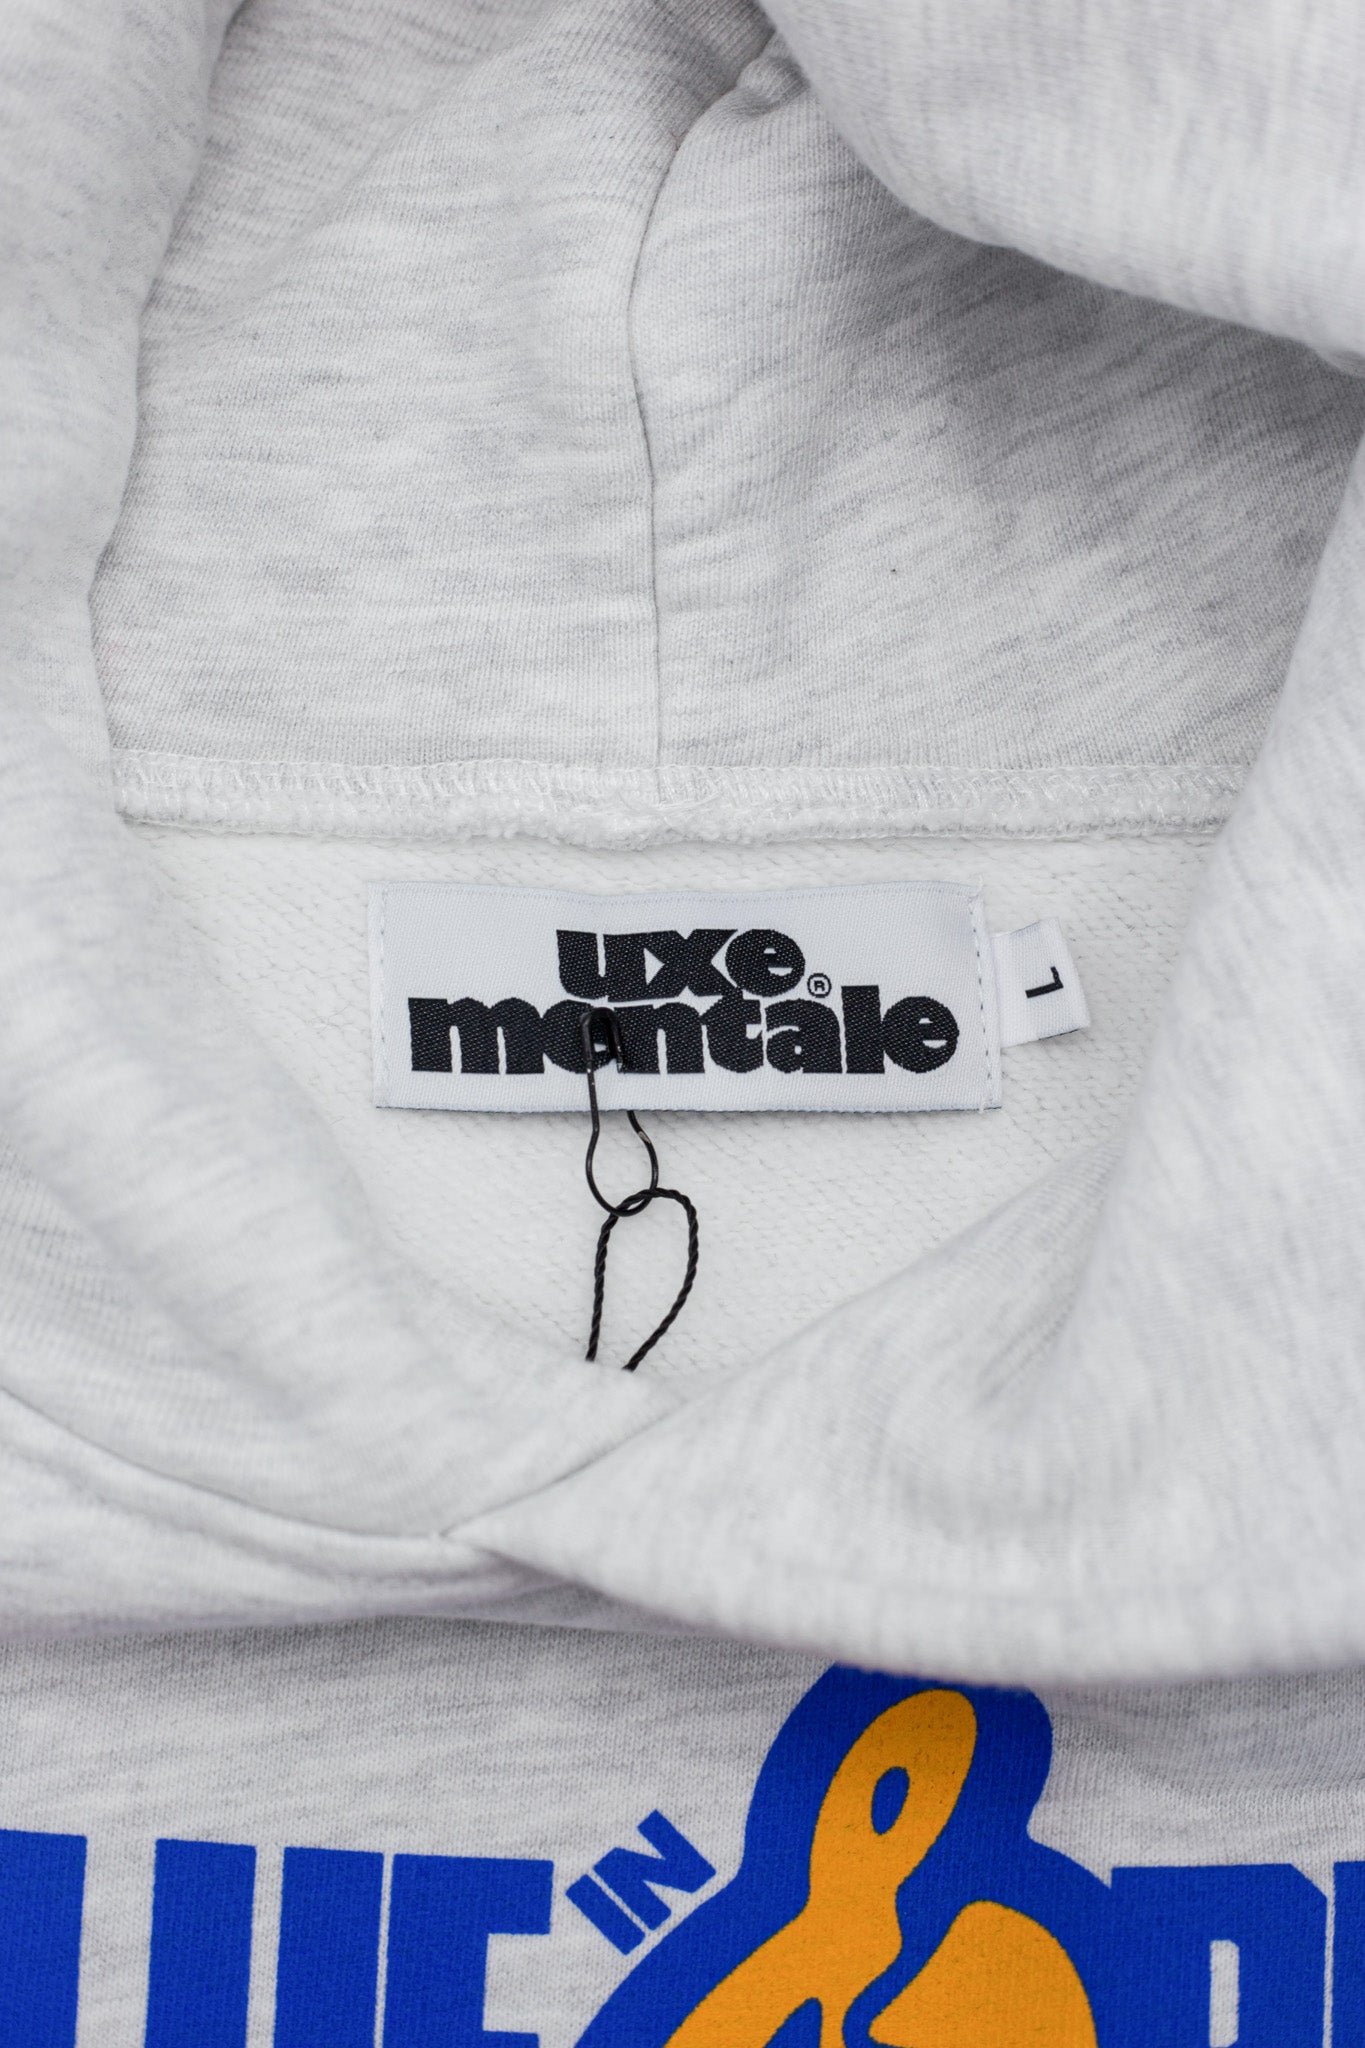 Uxe Mentale x Blue in Green Collaboration Hoodie